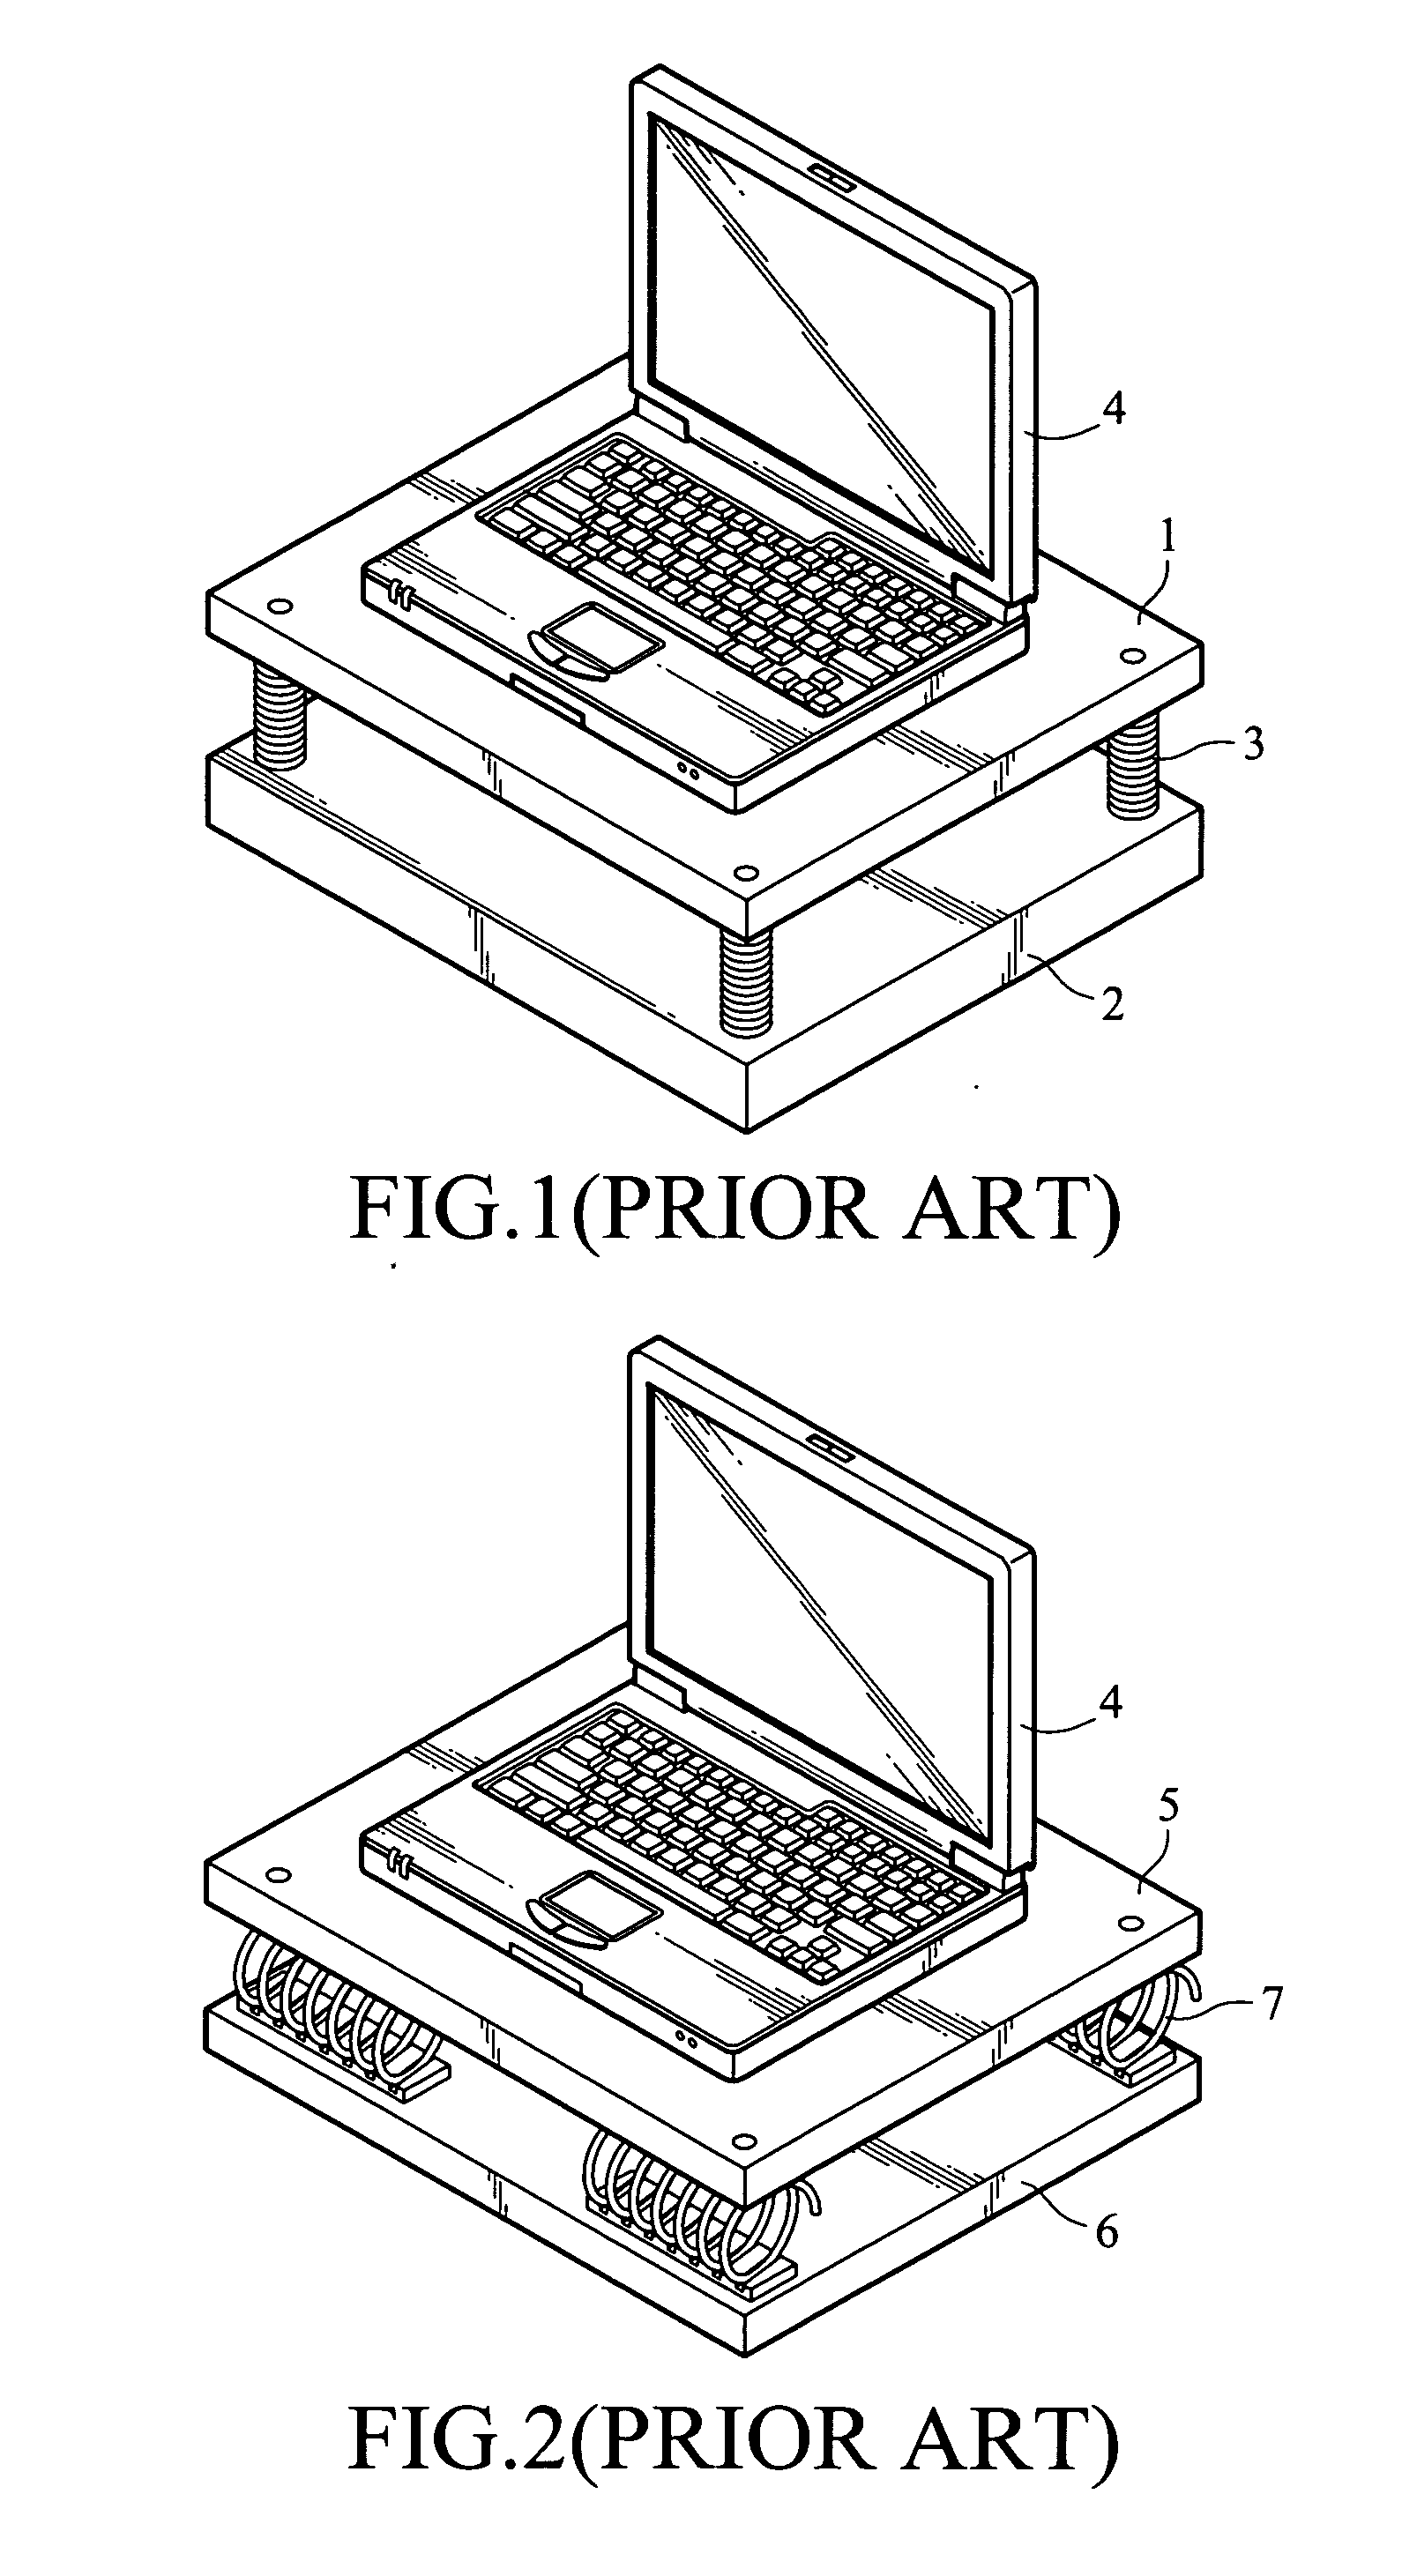 Shock isolation system for electronic devices